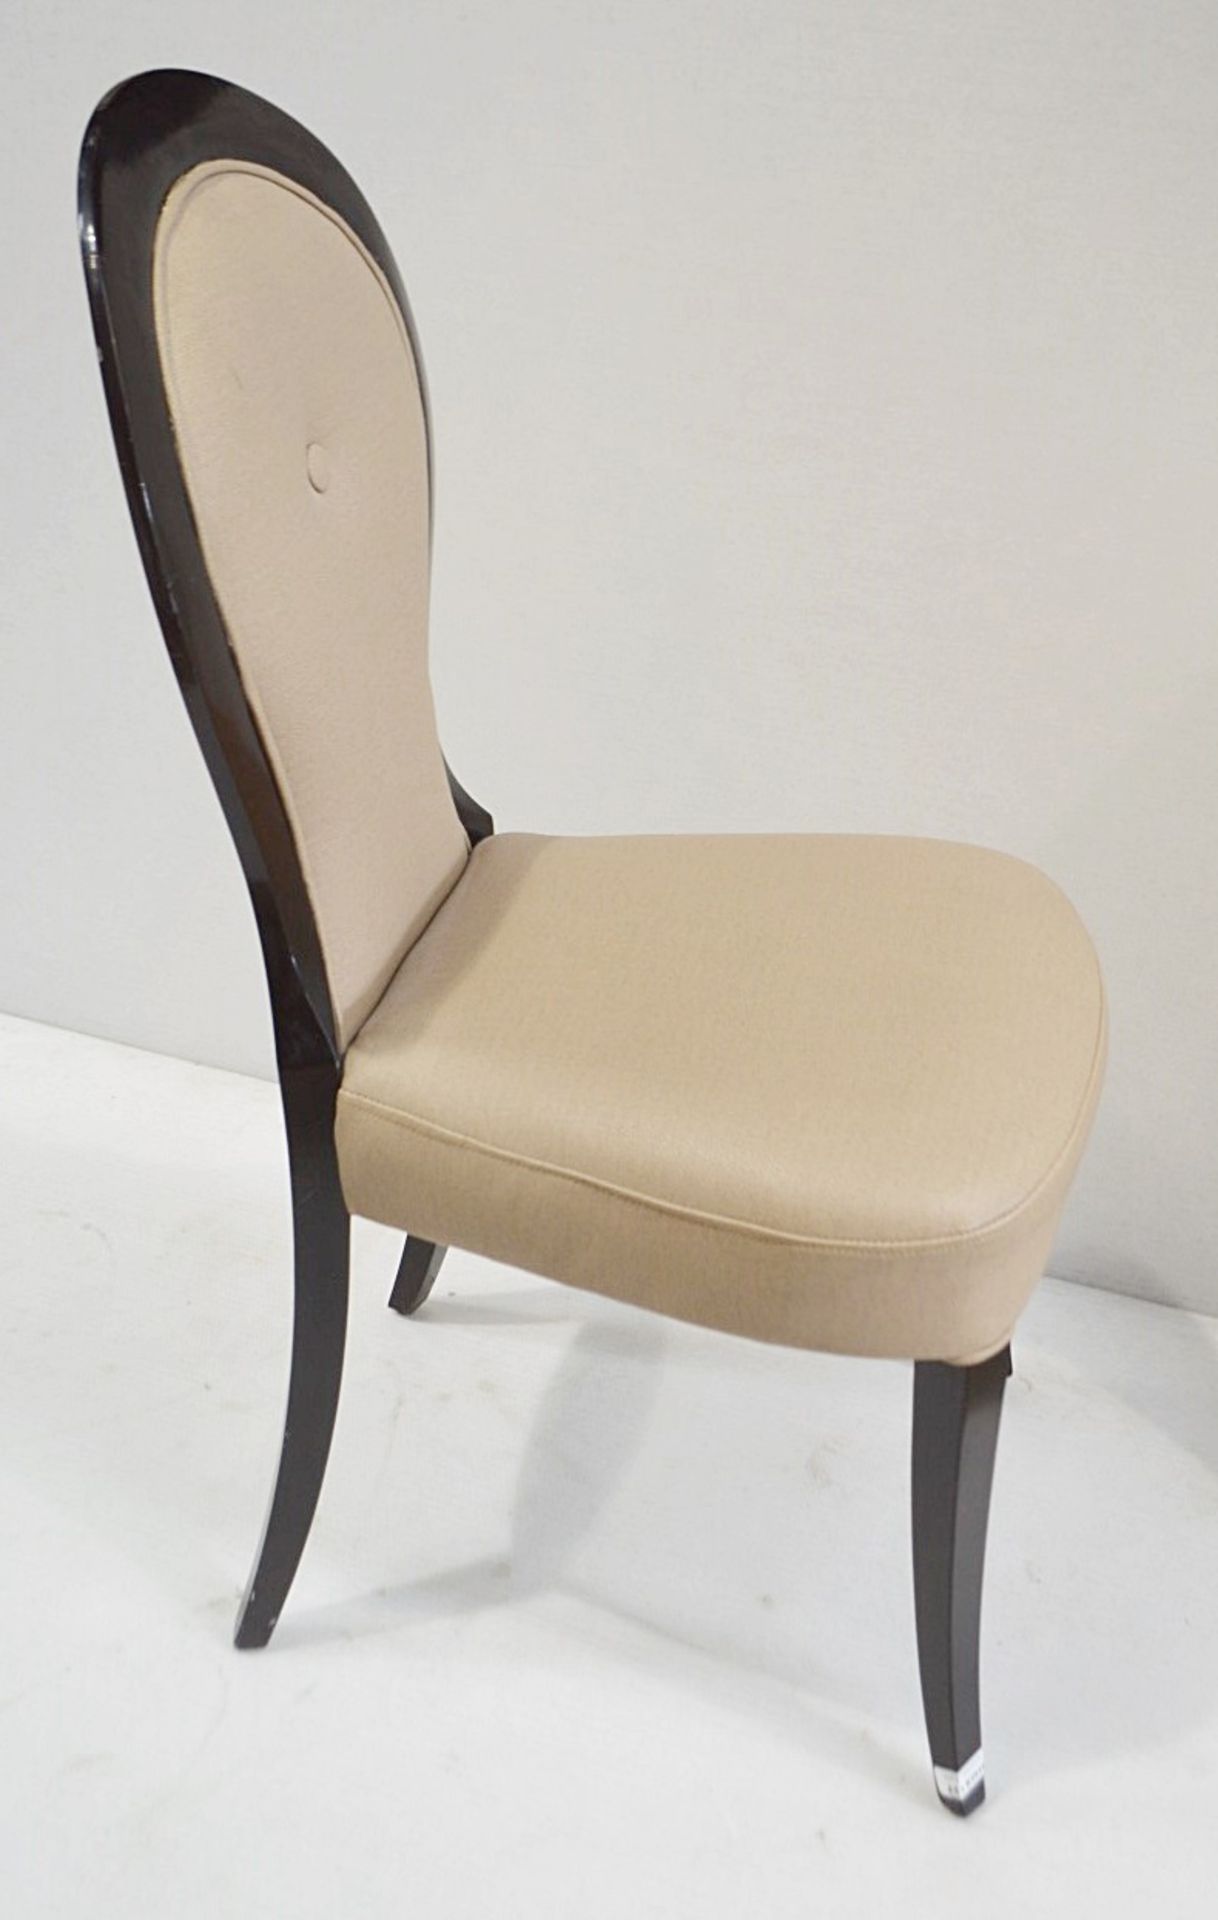 1 x Cushion Backed Chair With Curved Legs - Dimensions: H100 x W49 x D50cm / Seat 48cm - Ref: HMS127 - Image 2 of 4